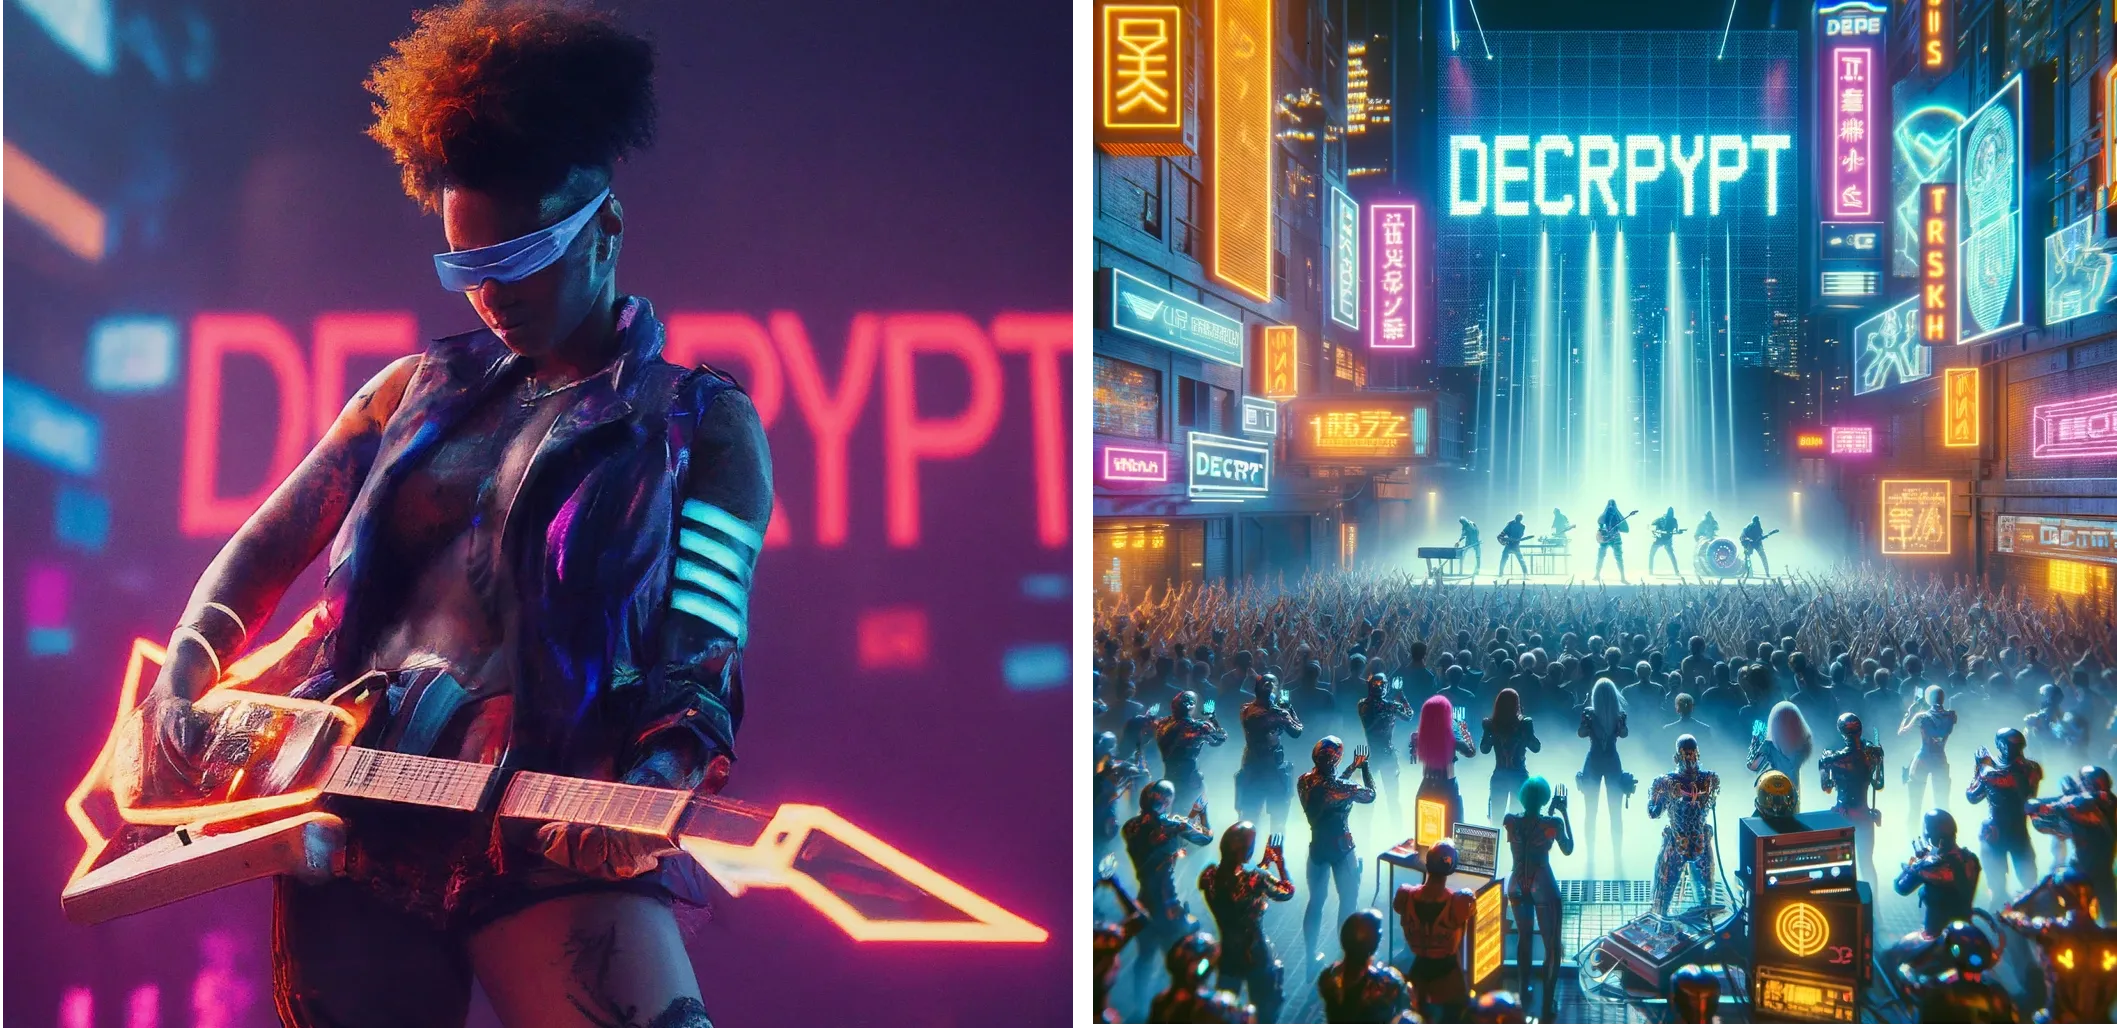 Cyberpunk futuristic artist performing on stage with the word "DECRYPT" in neon lights in the background. Gemini (left) vs ChatGPT Plus (right)